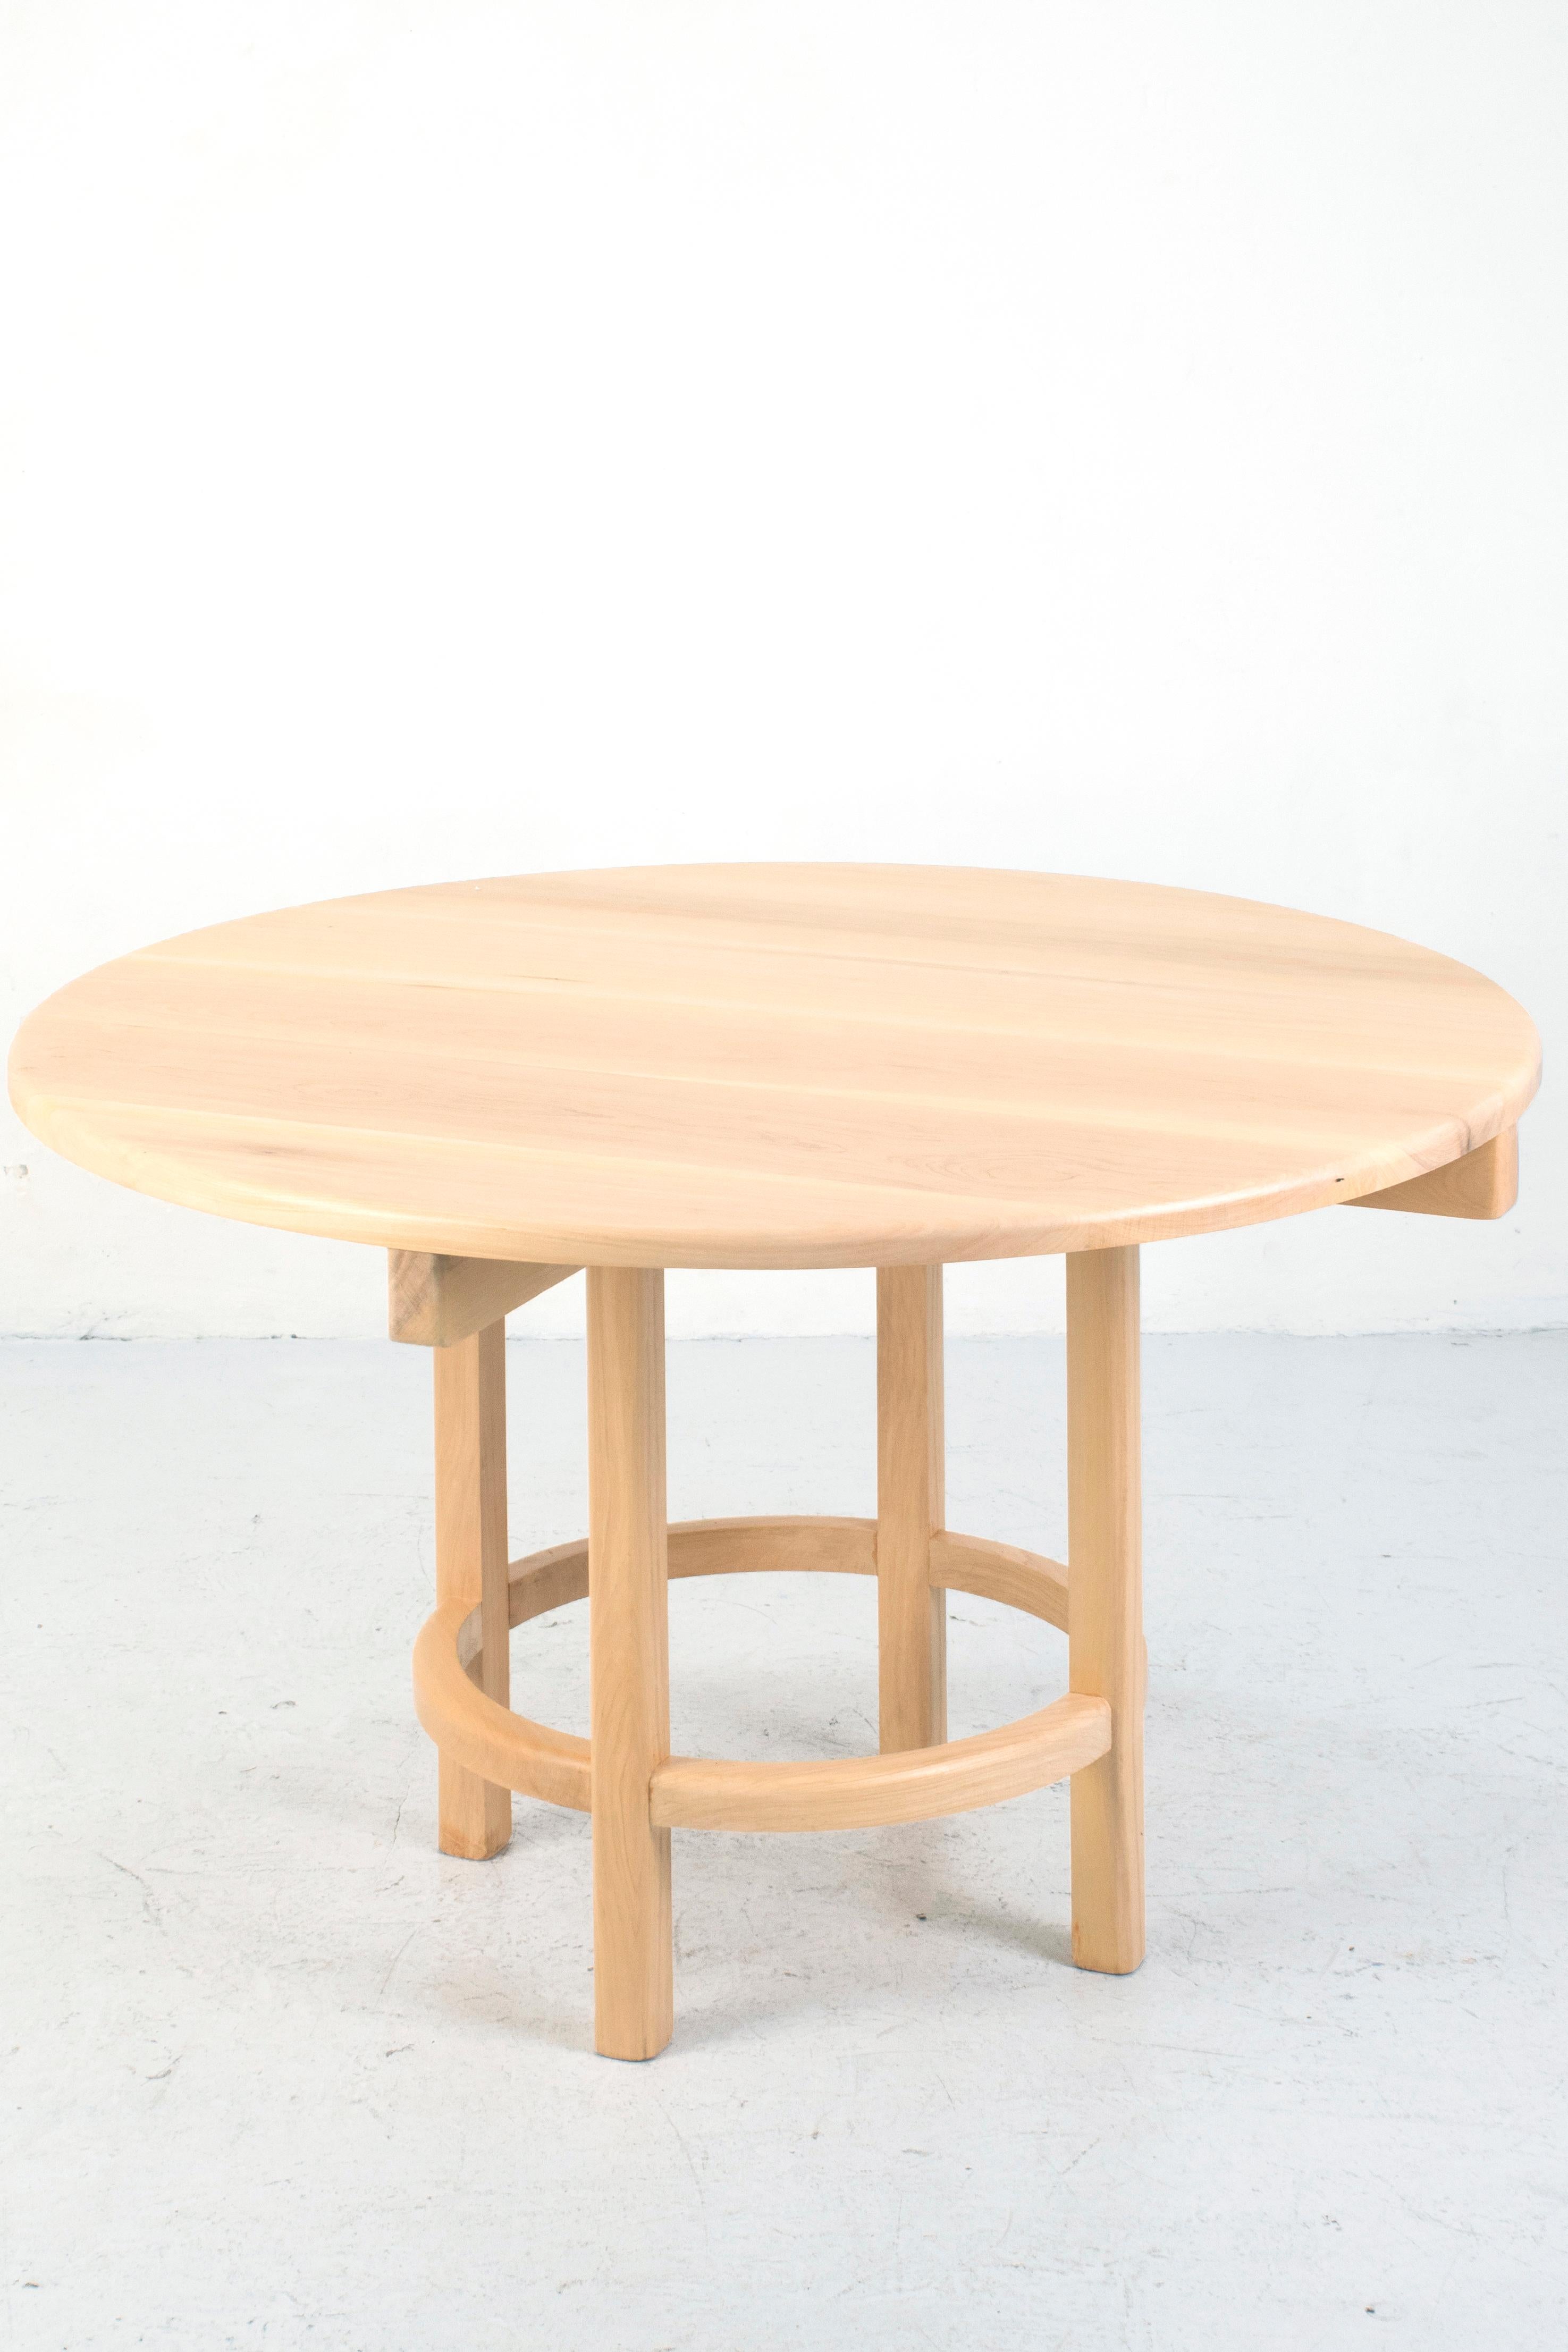 small round dining table for 4